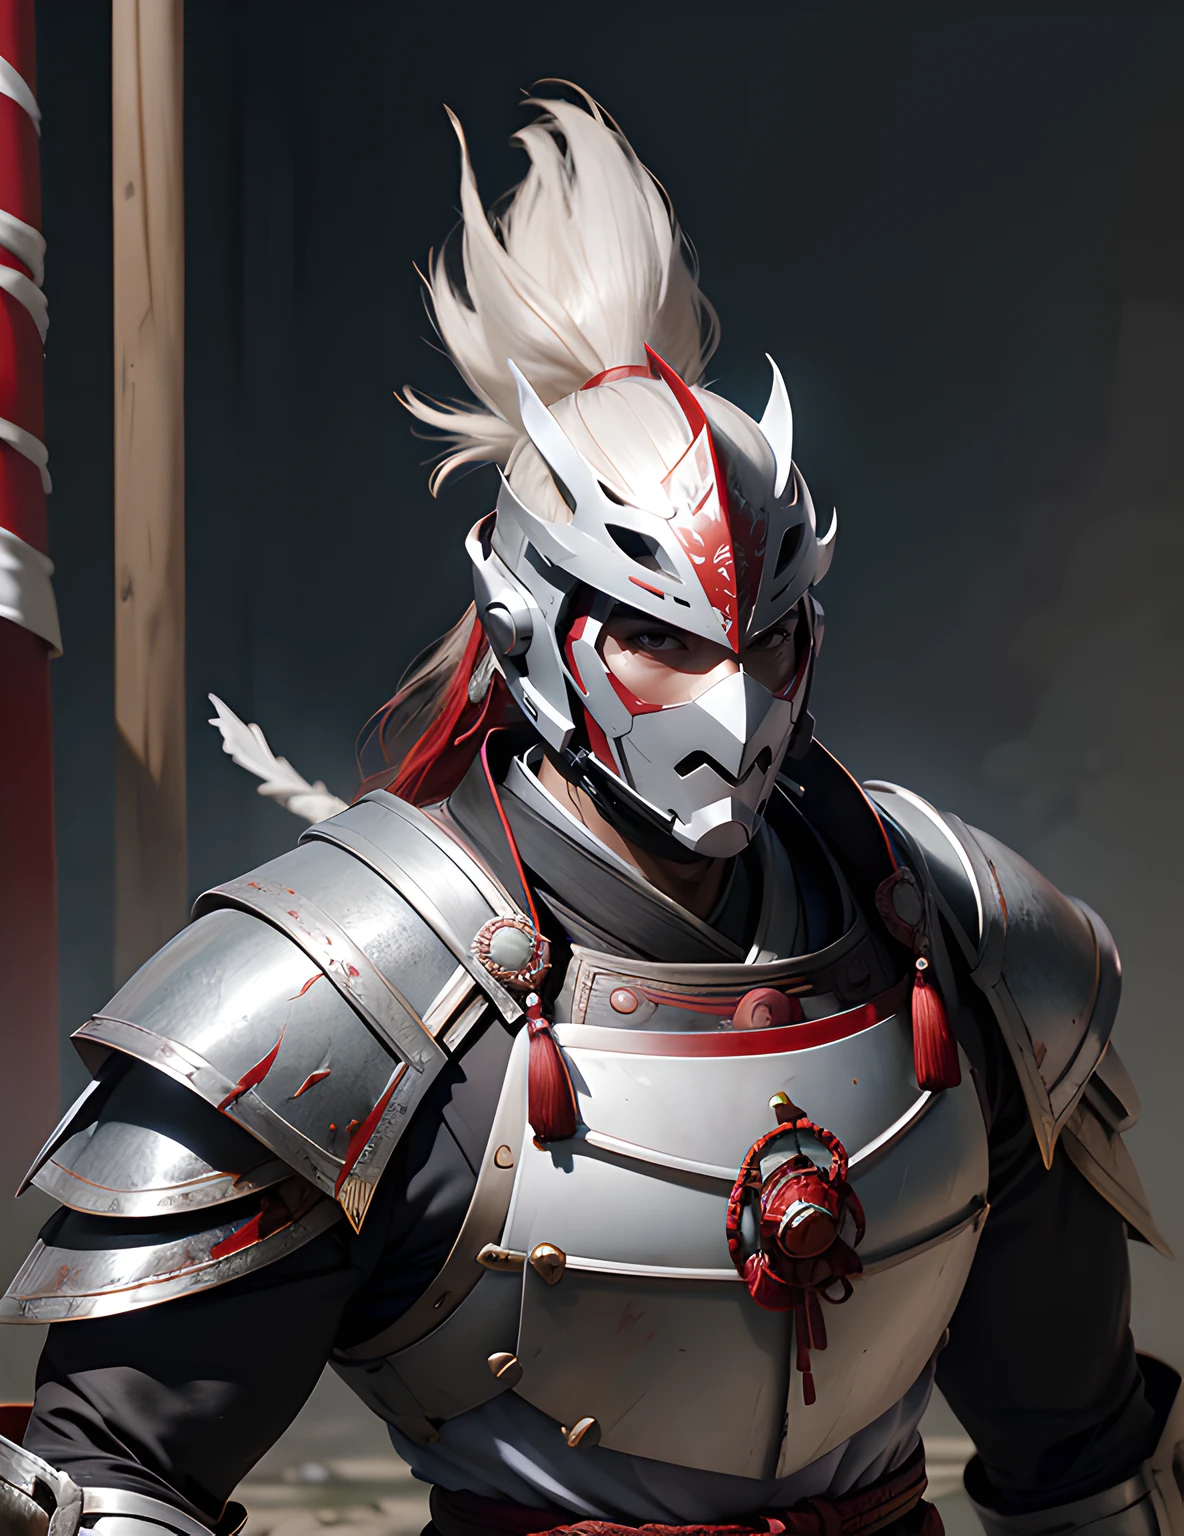 Japanese samurai wearing an exquisite white mask，No helmet, Urban Samurai, epic image, Era,frontal photos，The is very detailed，Straight A&#39;s，frontal photos，unwind，No helmet，Bunched hair，silver red armor，Broken armor，The body is not clean，bleed，Fighting posture，at the battlefield，stand posture，preparing to fight，